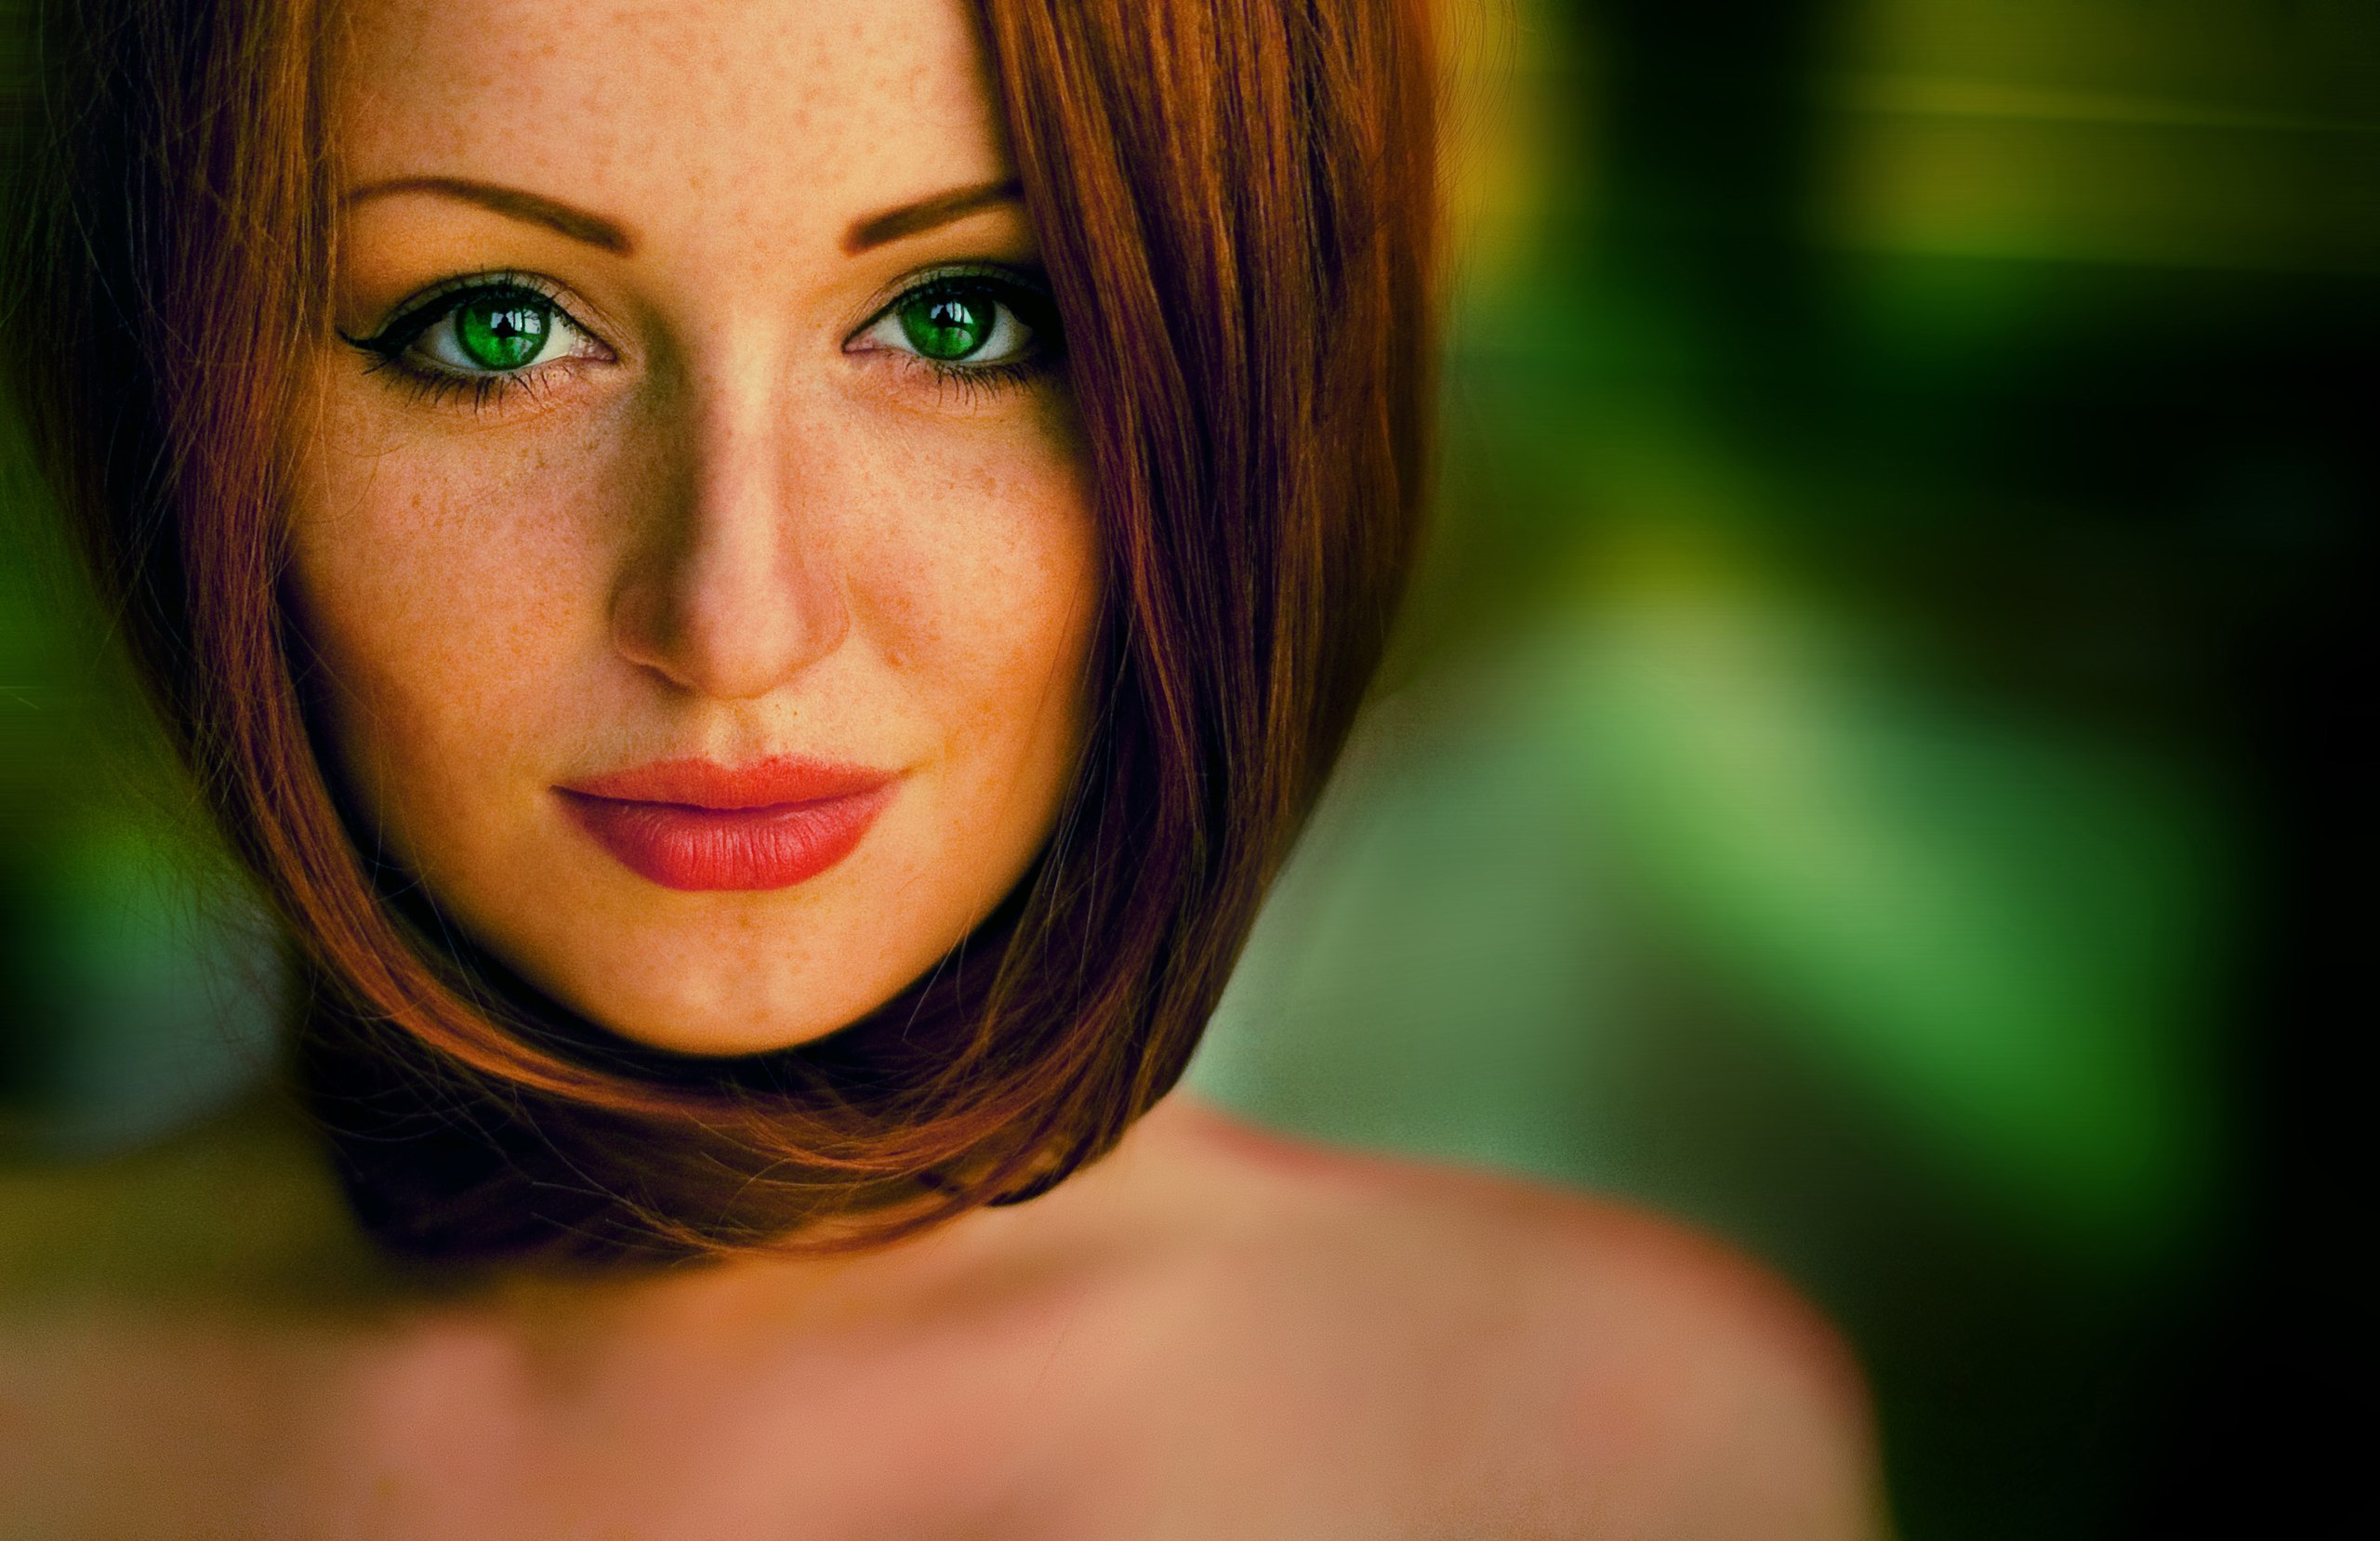 Green Eyes Girl Hd Hd Girls 4k Wallpapers Images Backgrounds Photos And Pictures